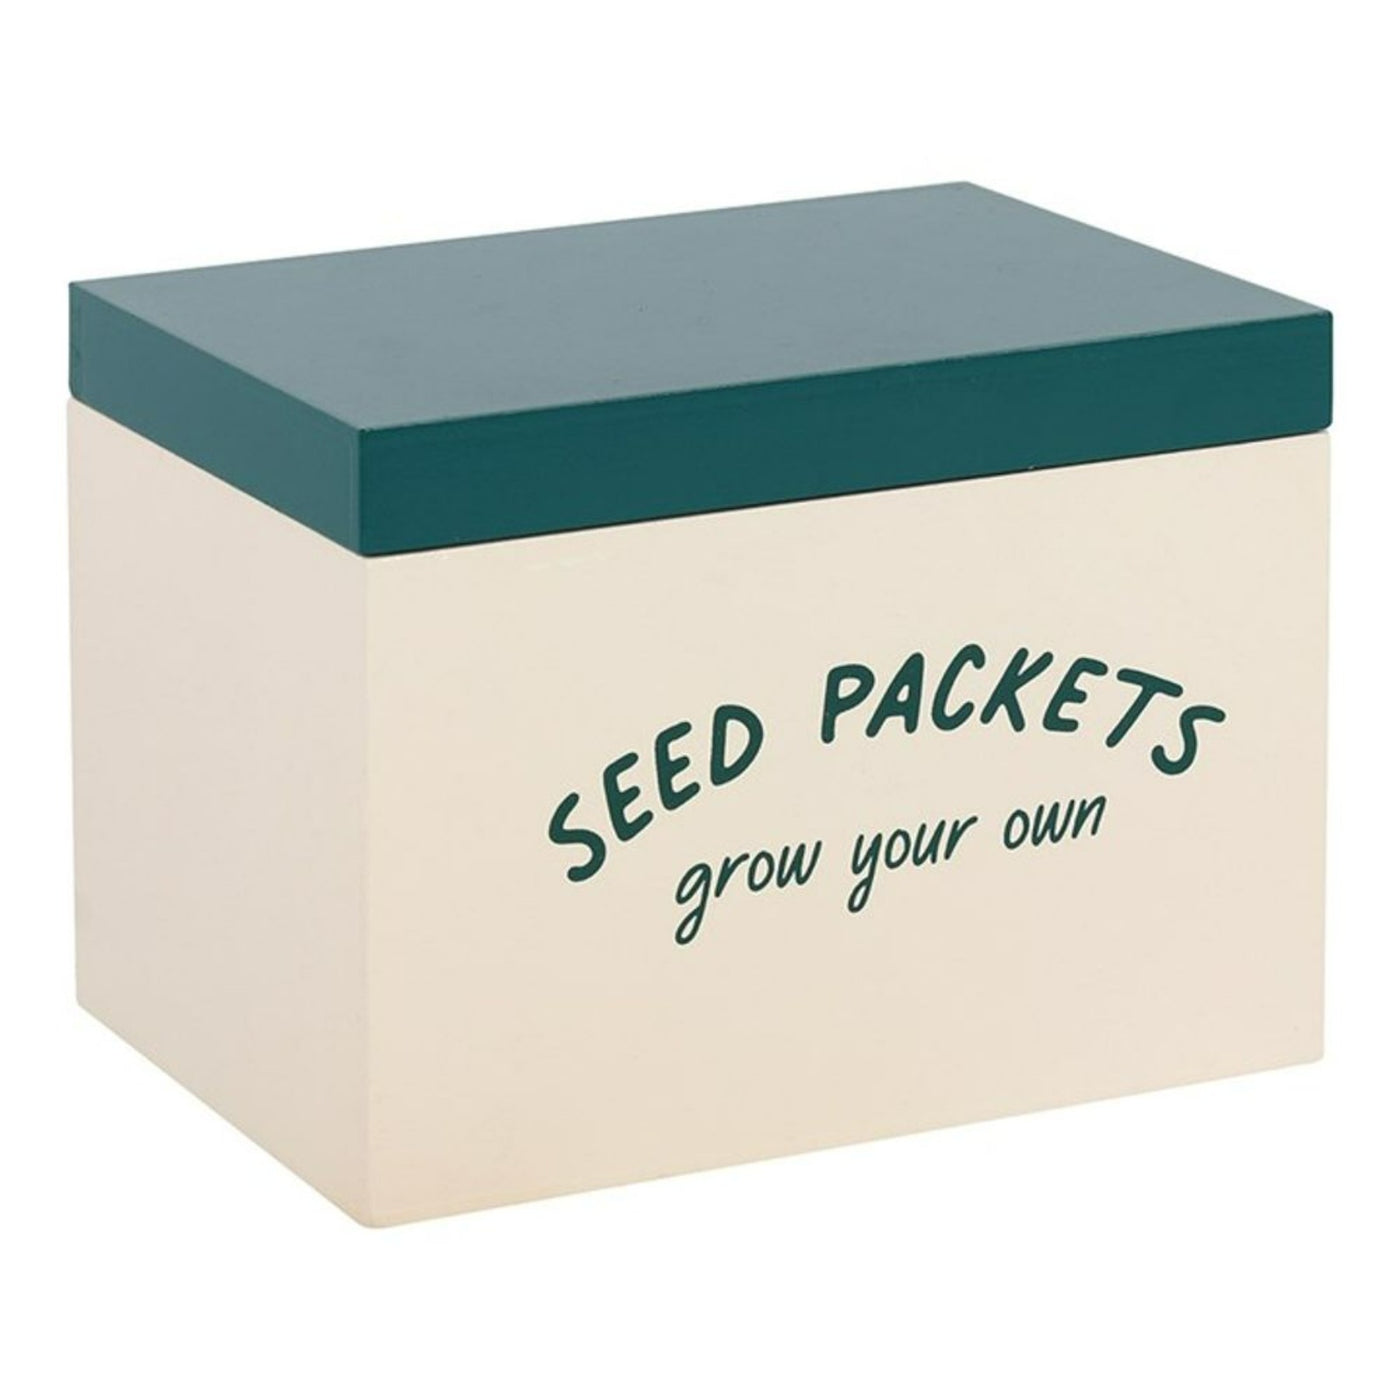 Storage Box For Plant Seeds.